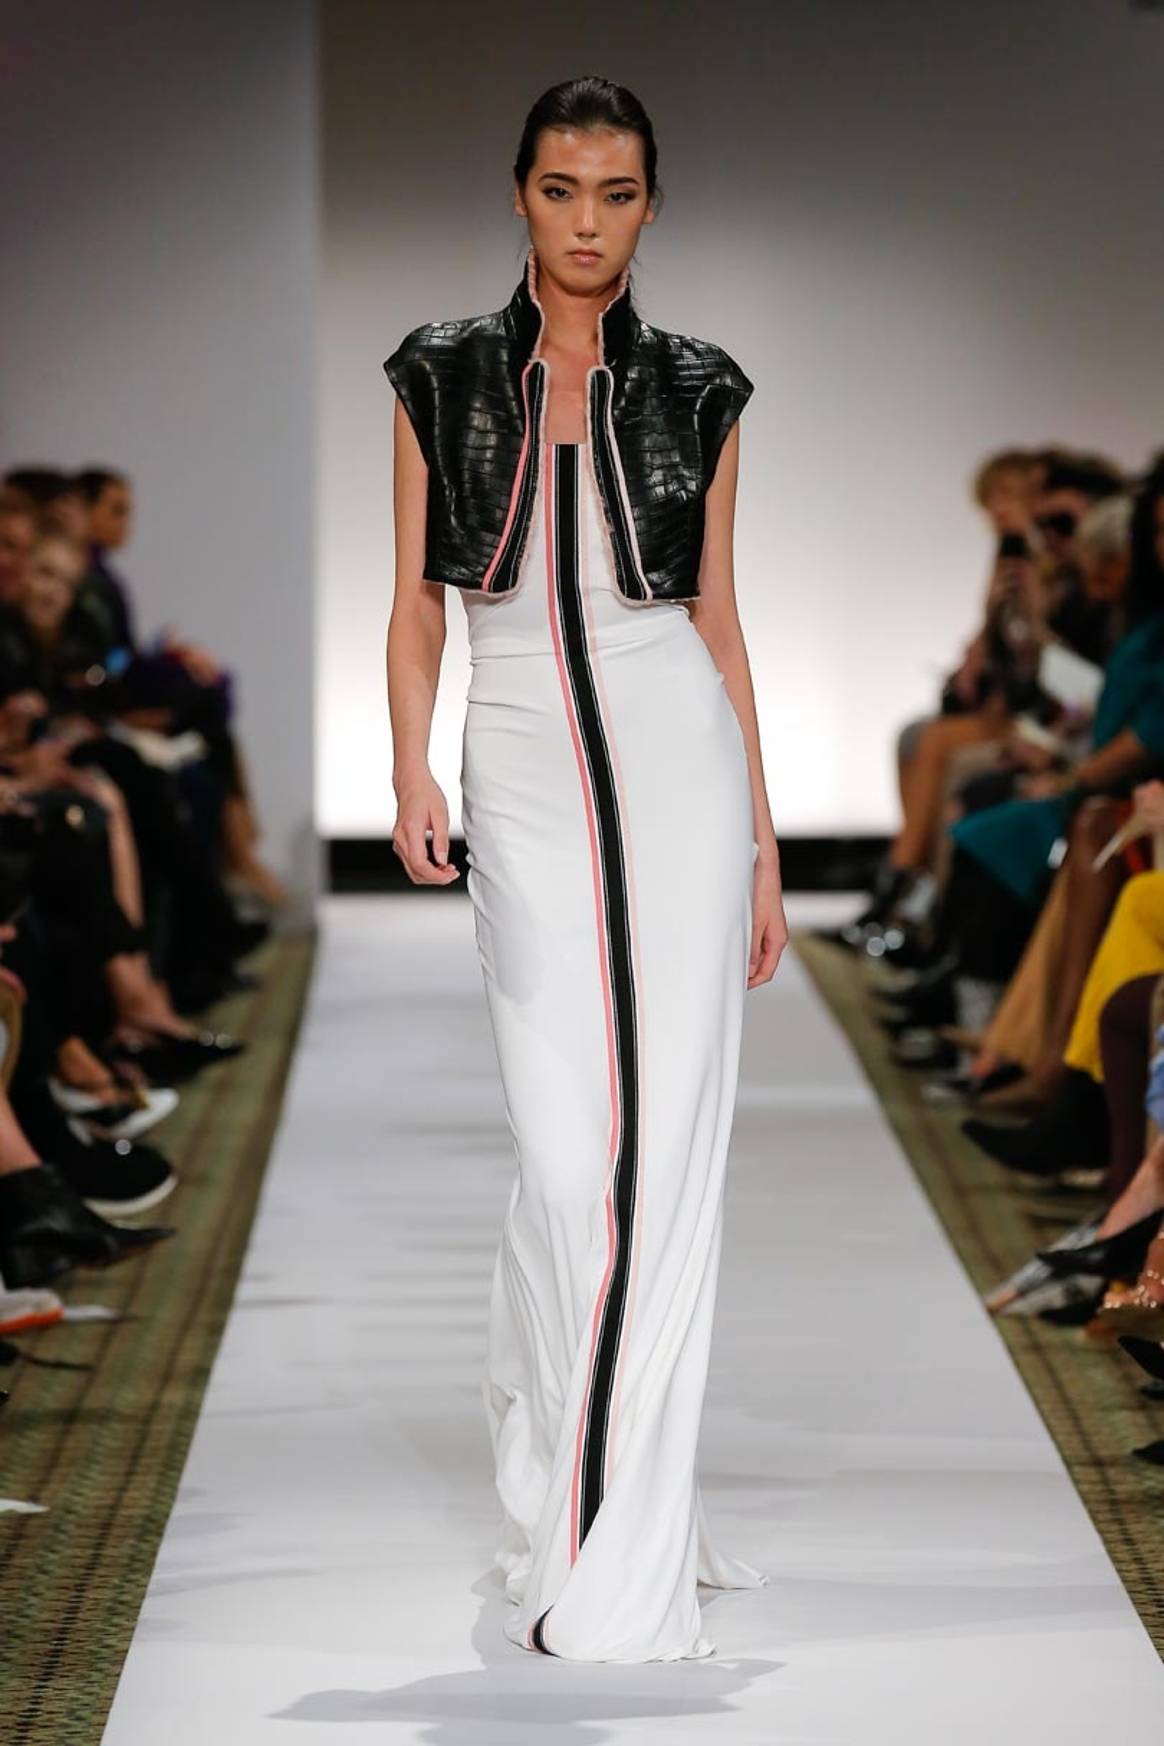 Dennis Basso found inspiration from the global woman at NYFW